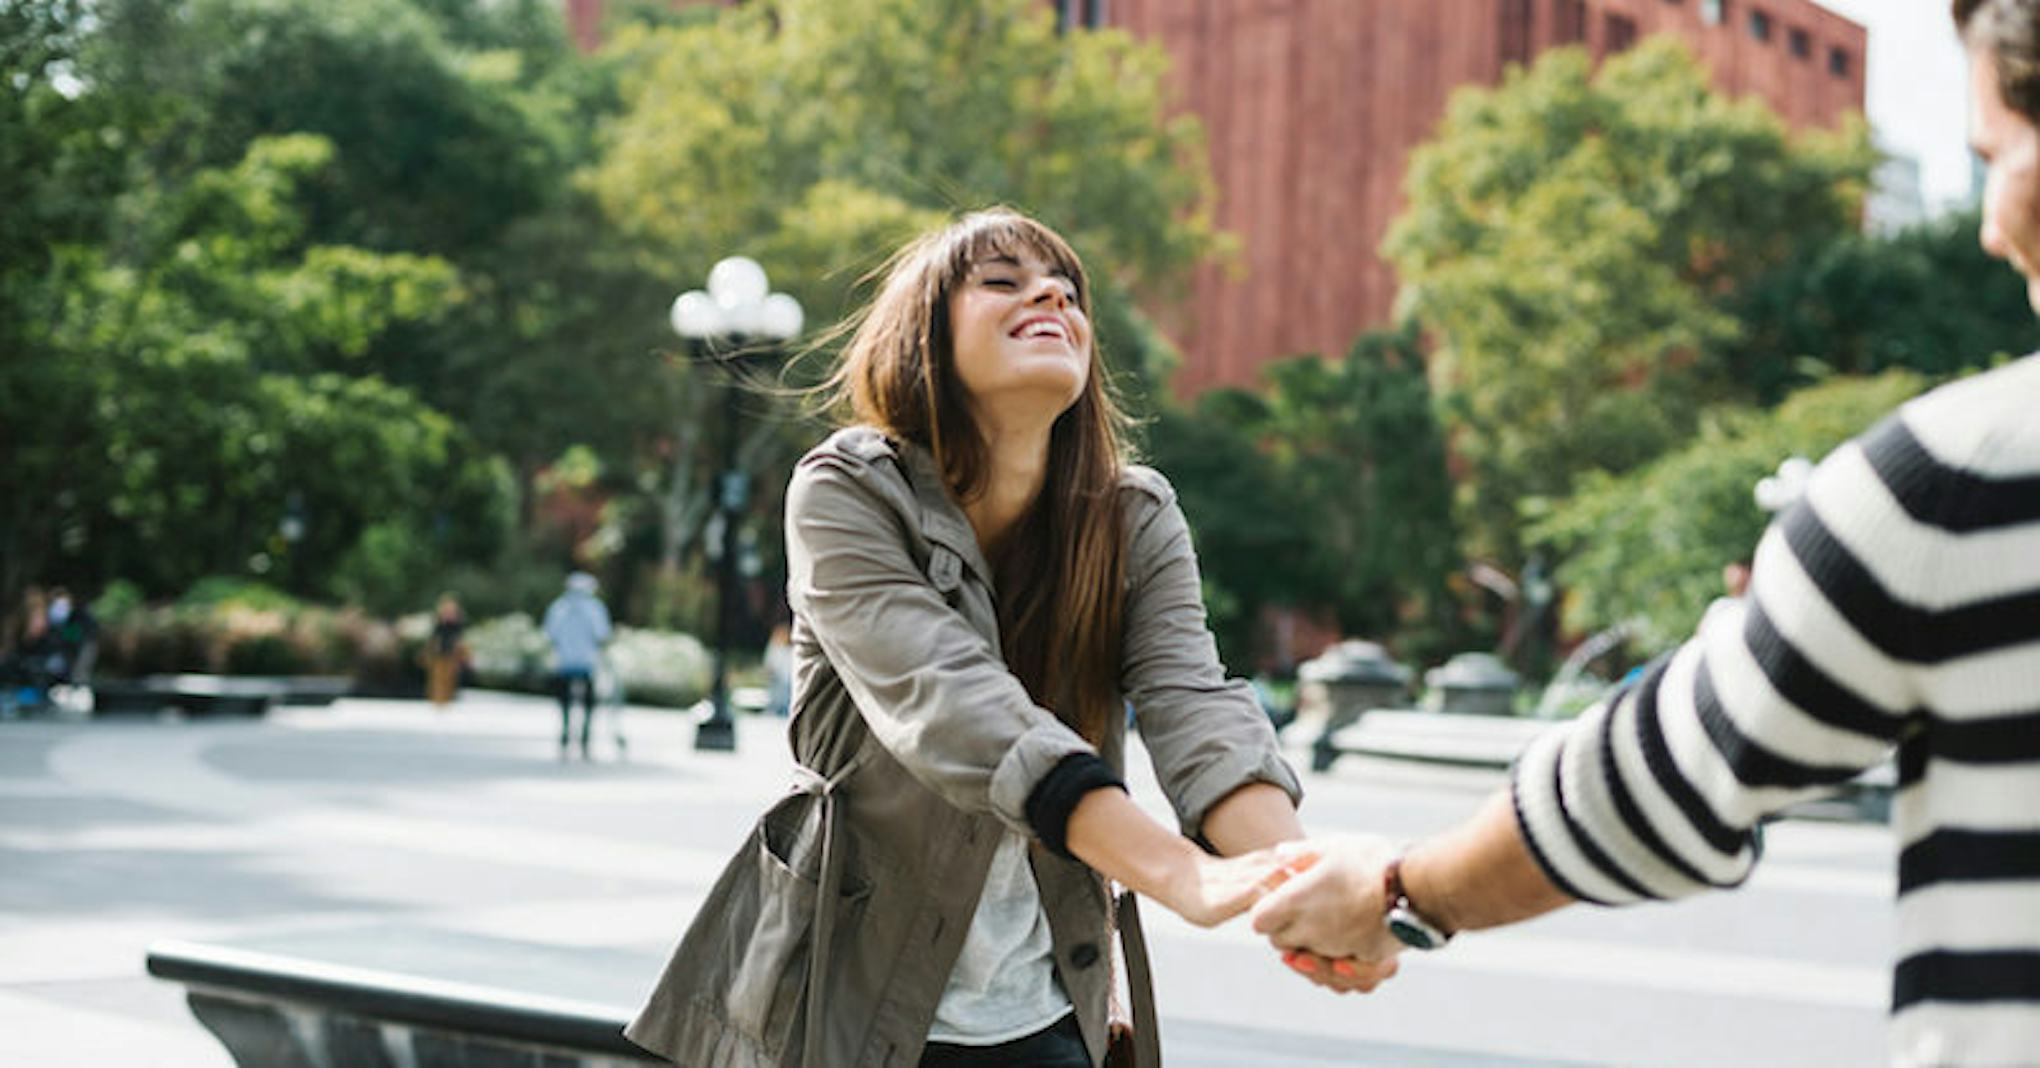 6 Subtle Things Guys Will Do When They Want To See You For A Second Date